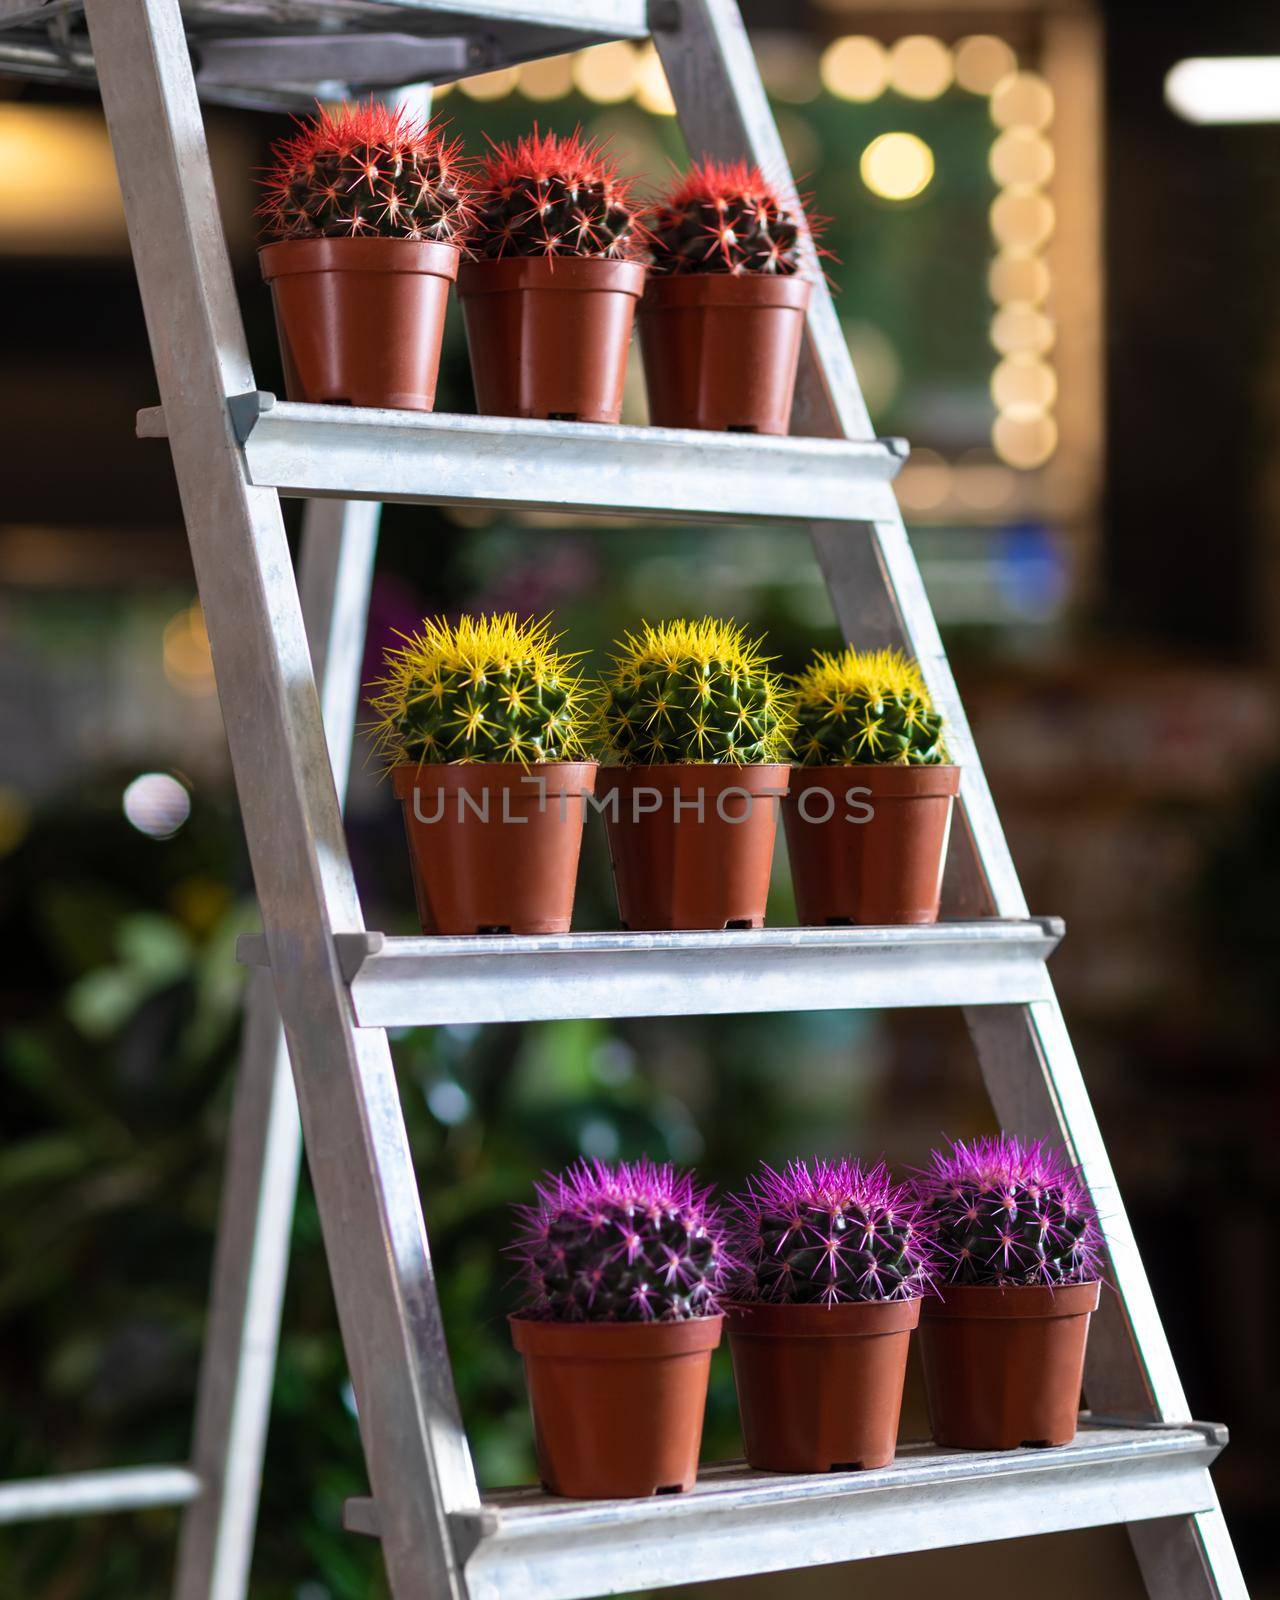 Colorful cactuses in the showcase